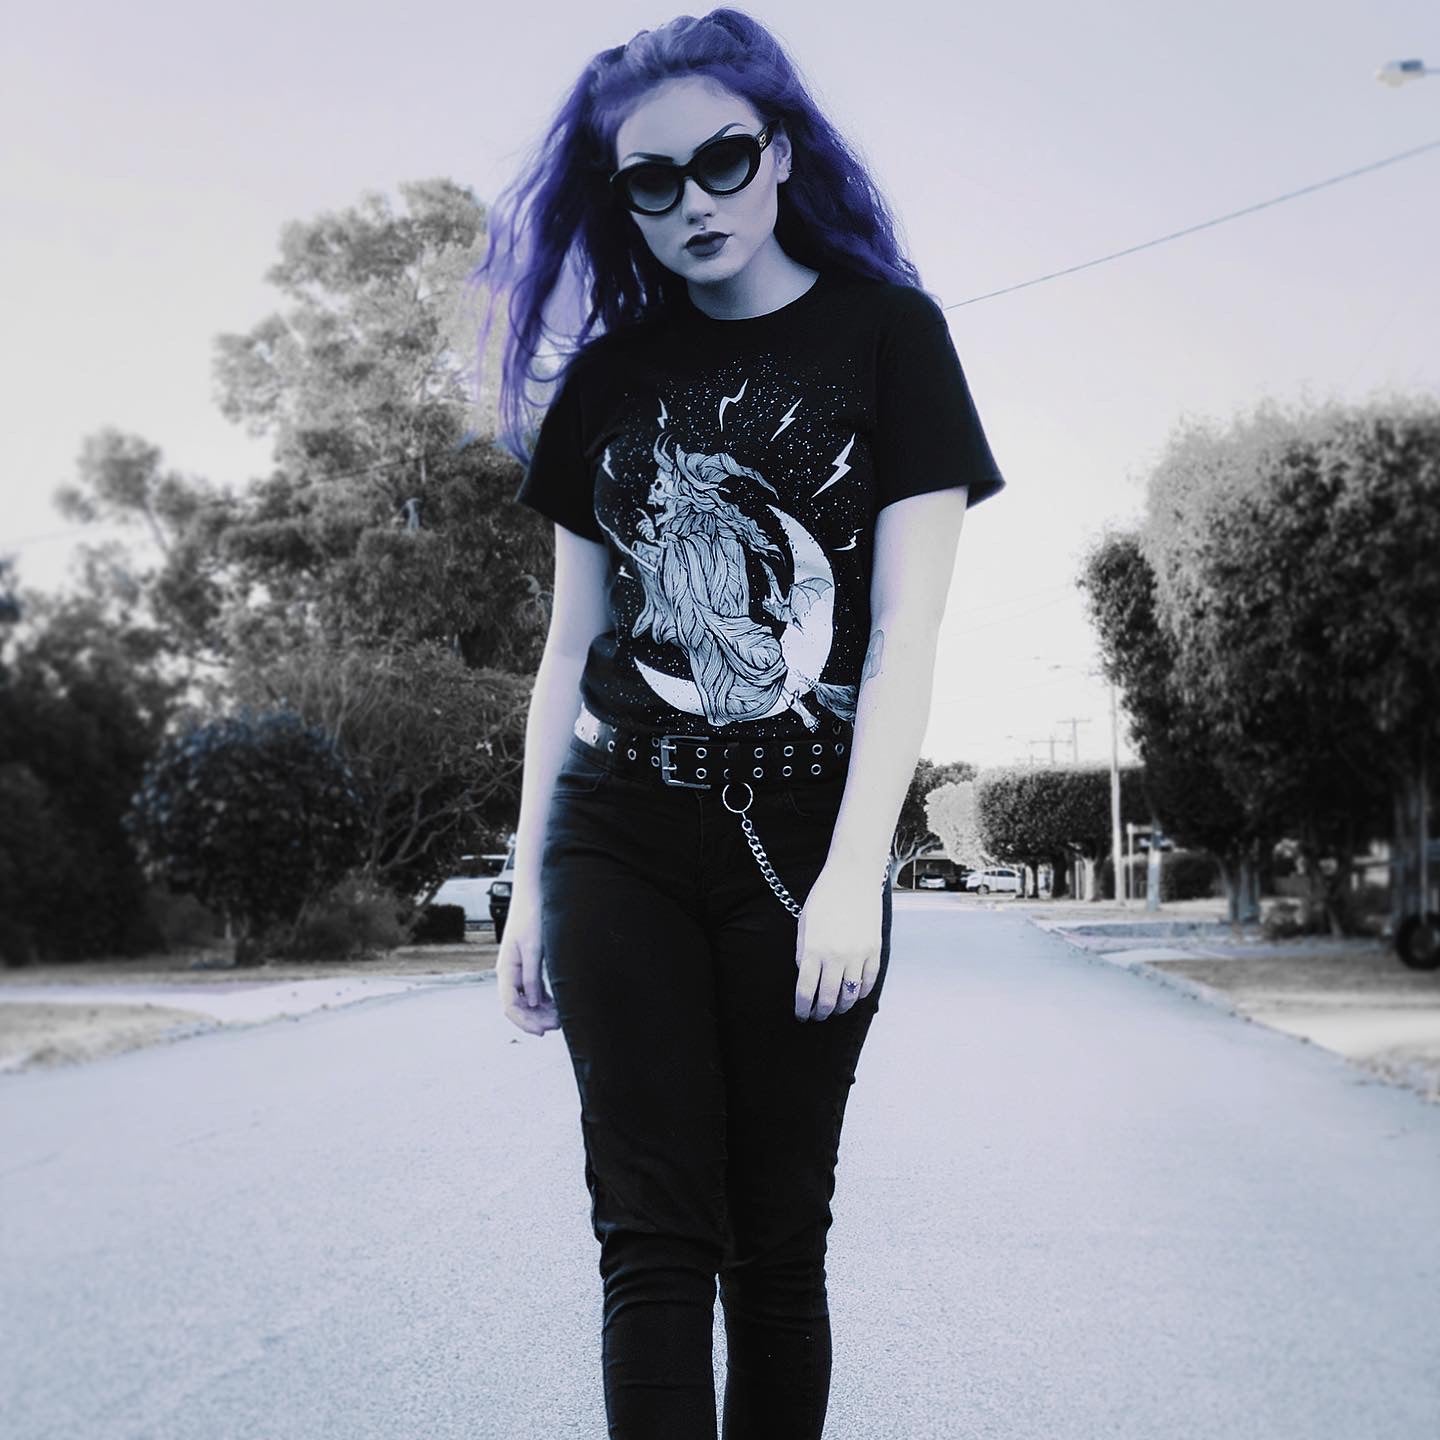 Moon Witch Tee